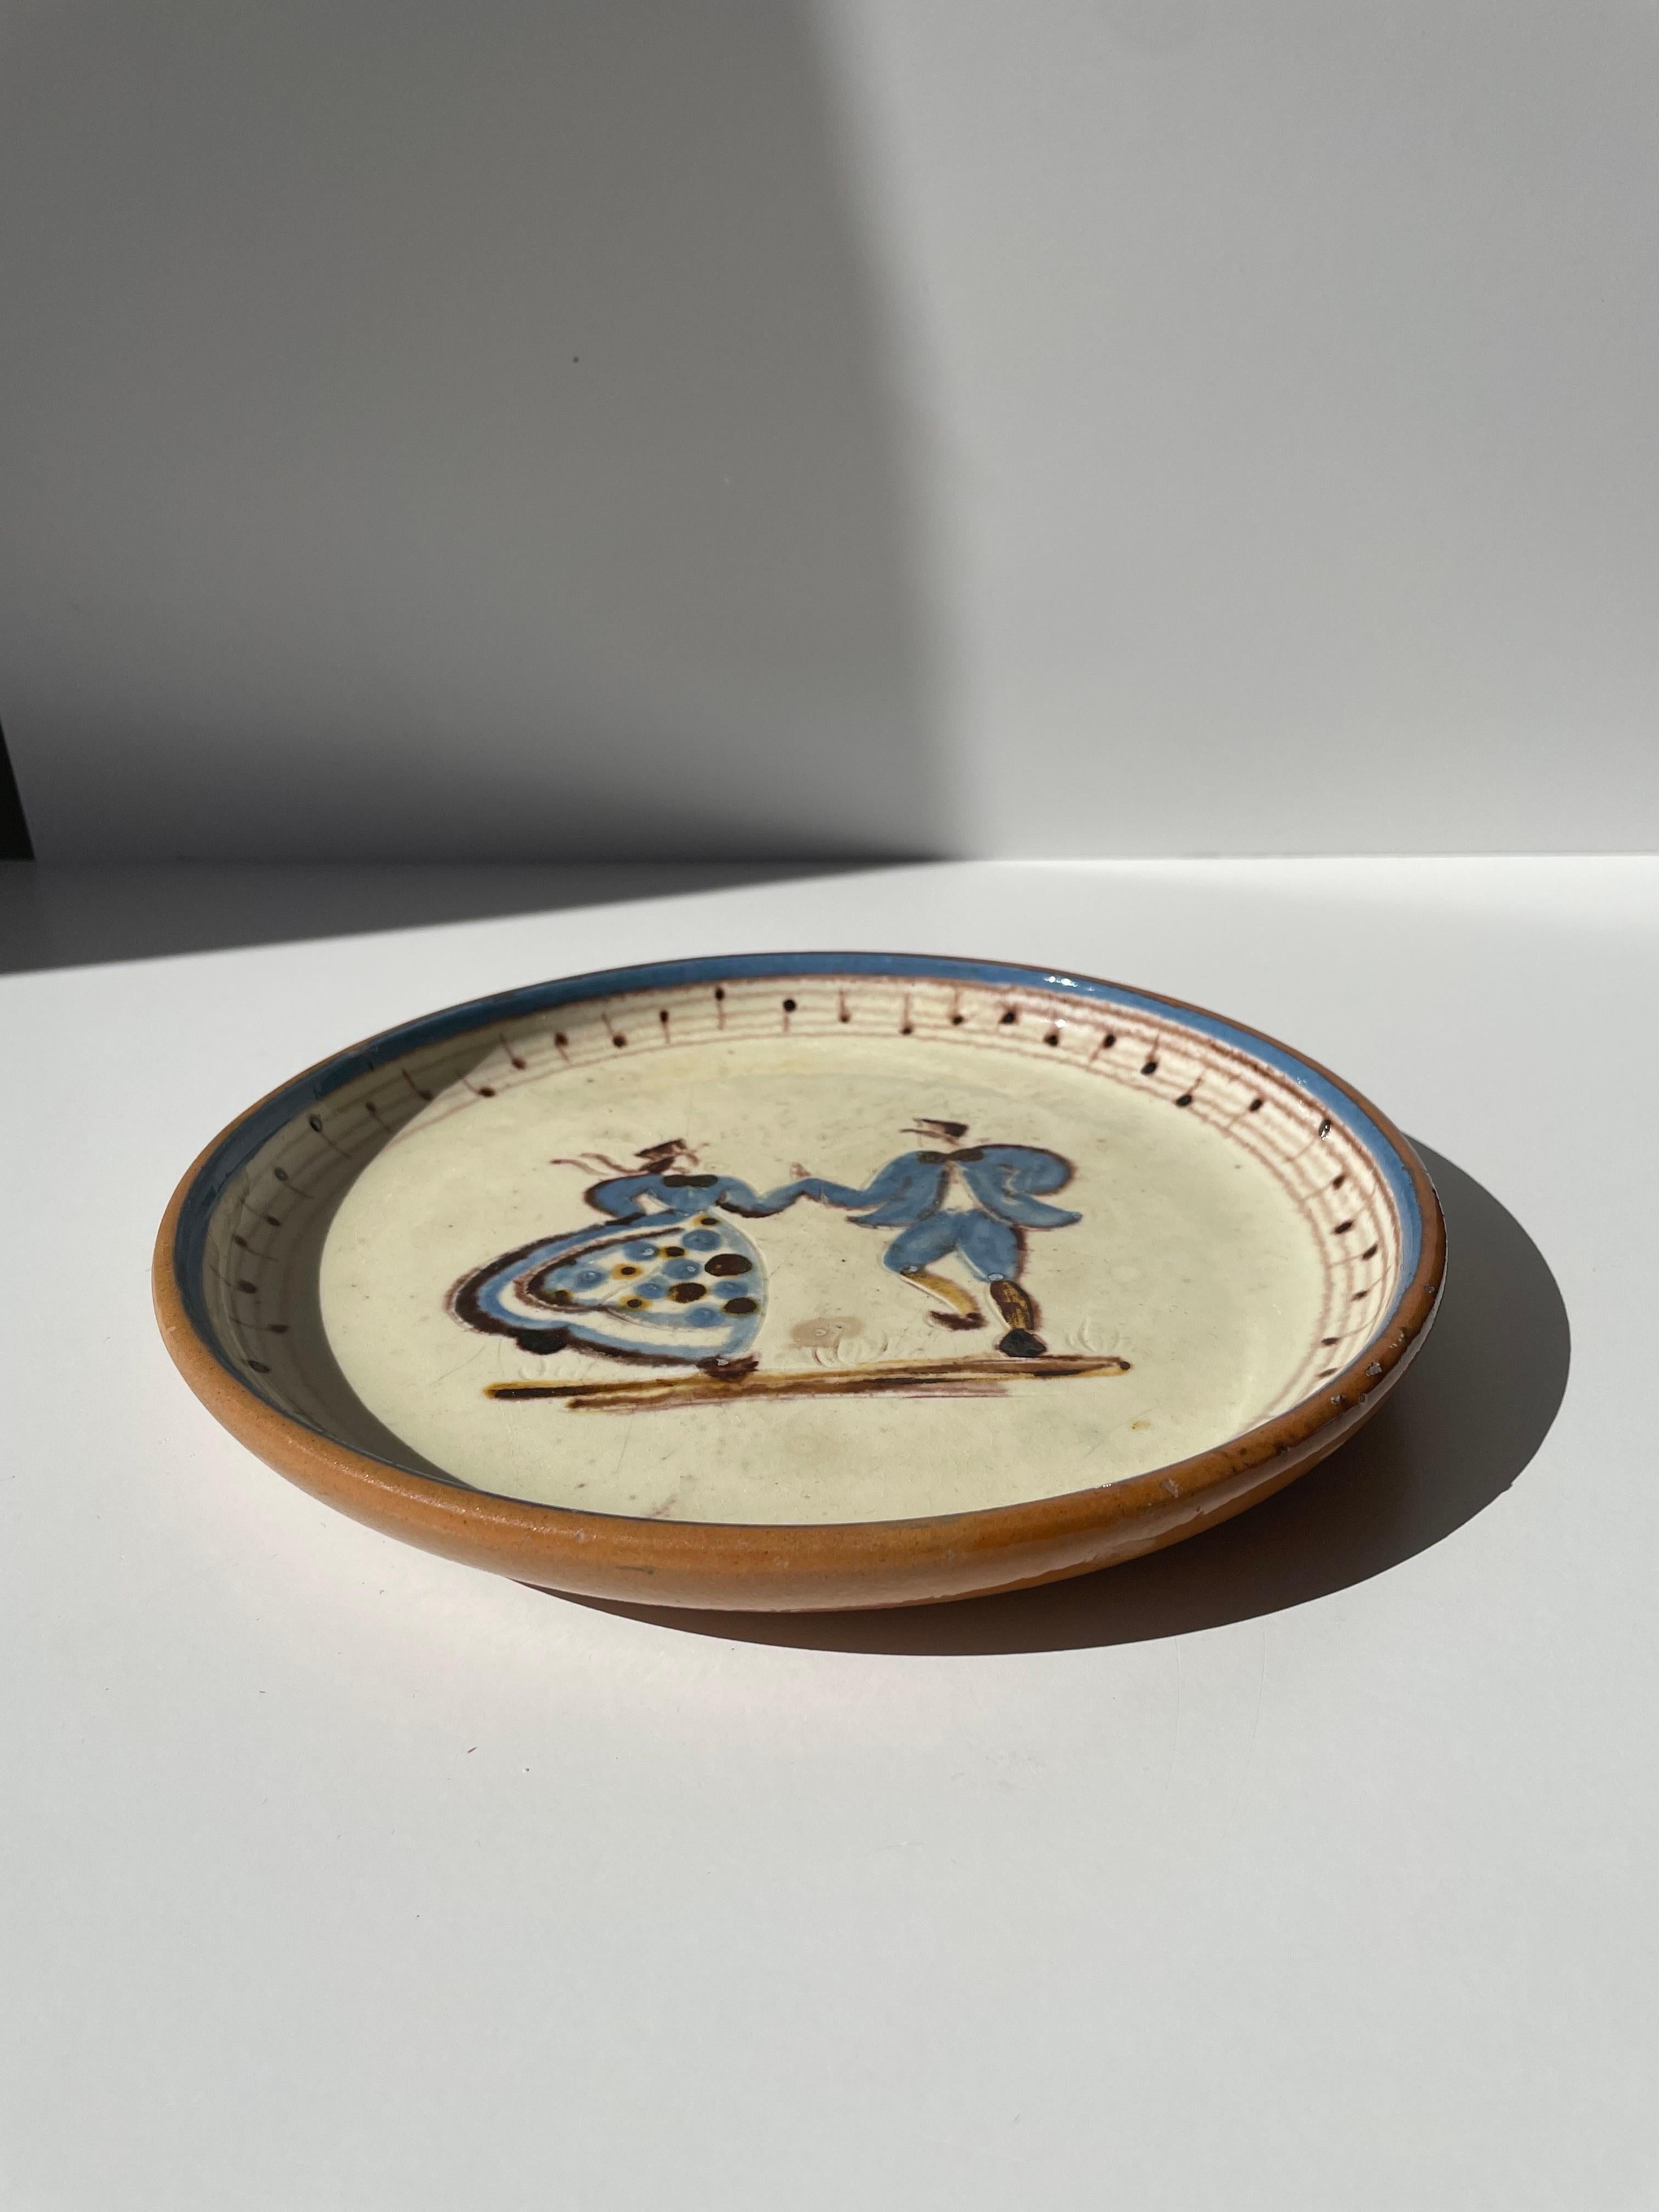 20th Century Knabstrup Hand-Painted Ceramic Decorative Plate, 1950s For Sale